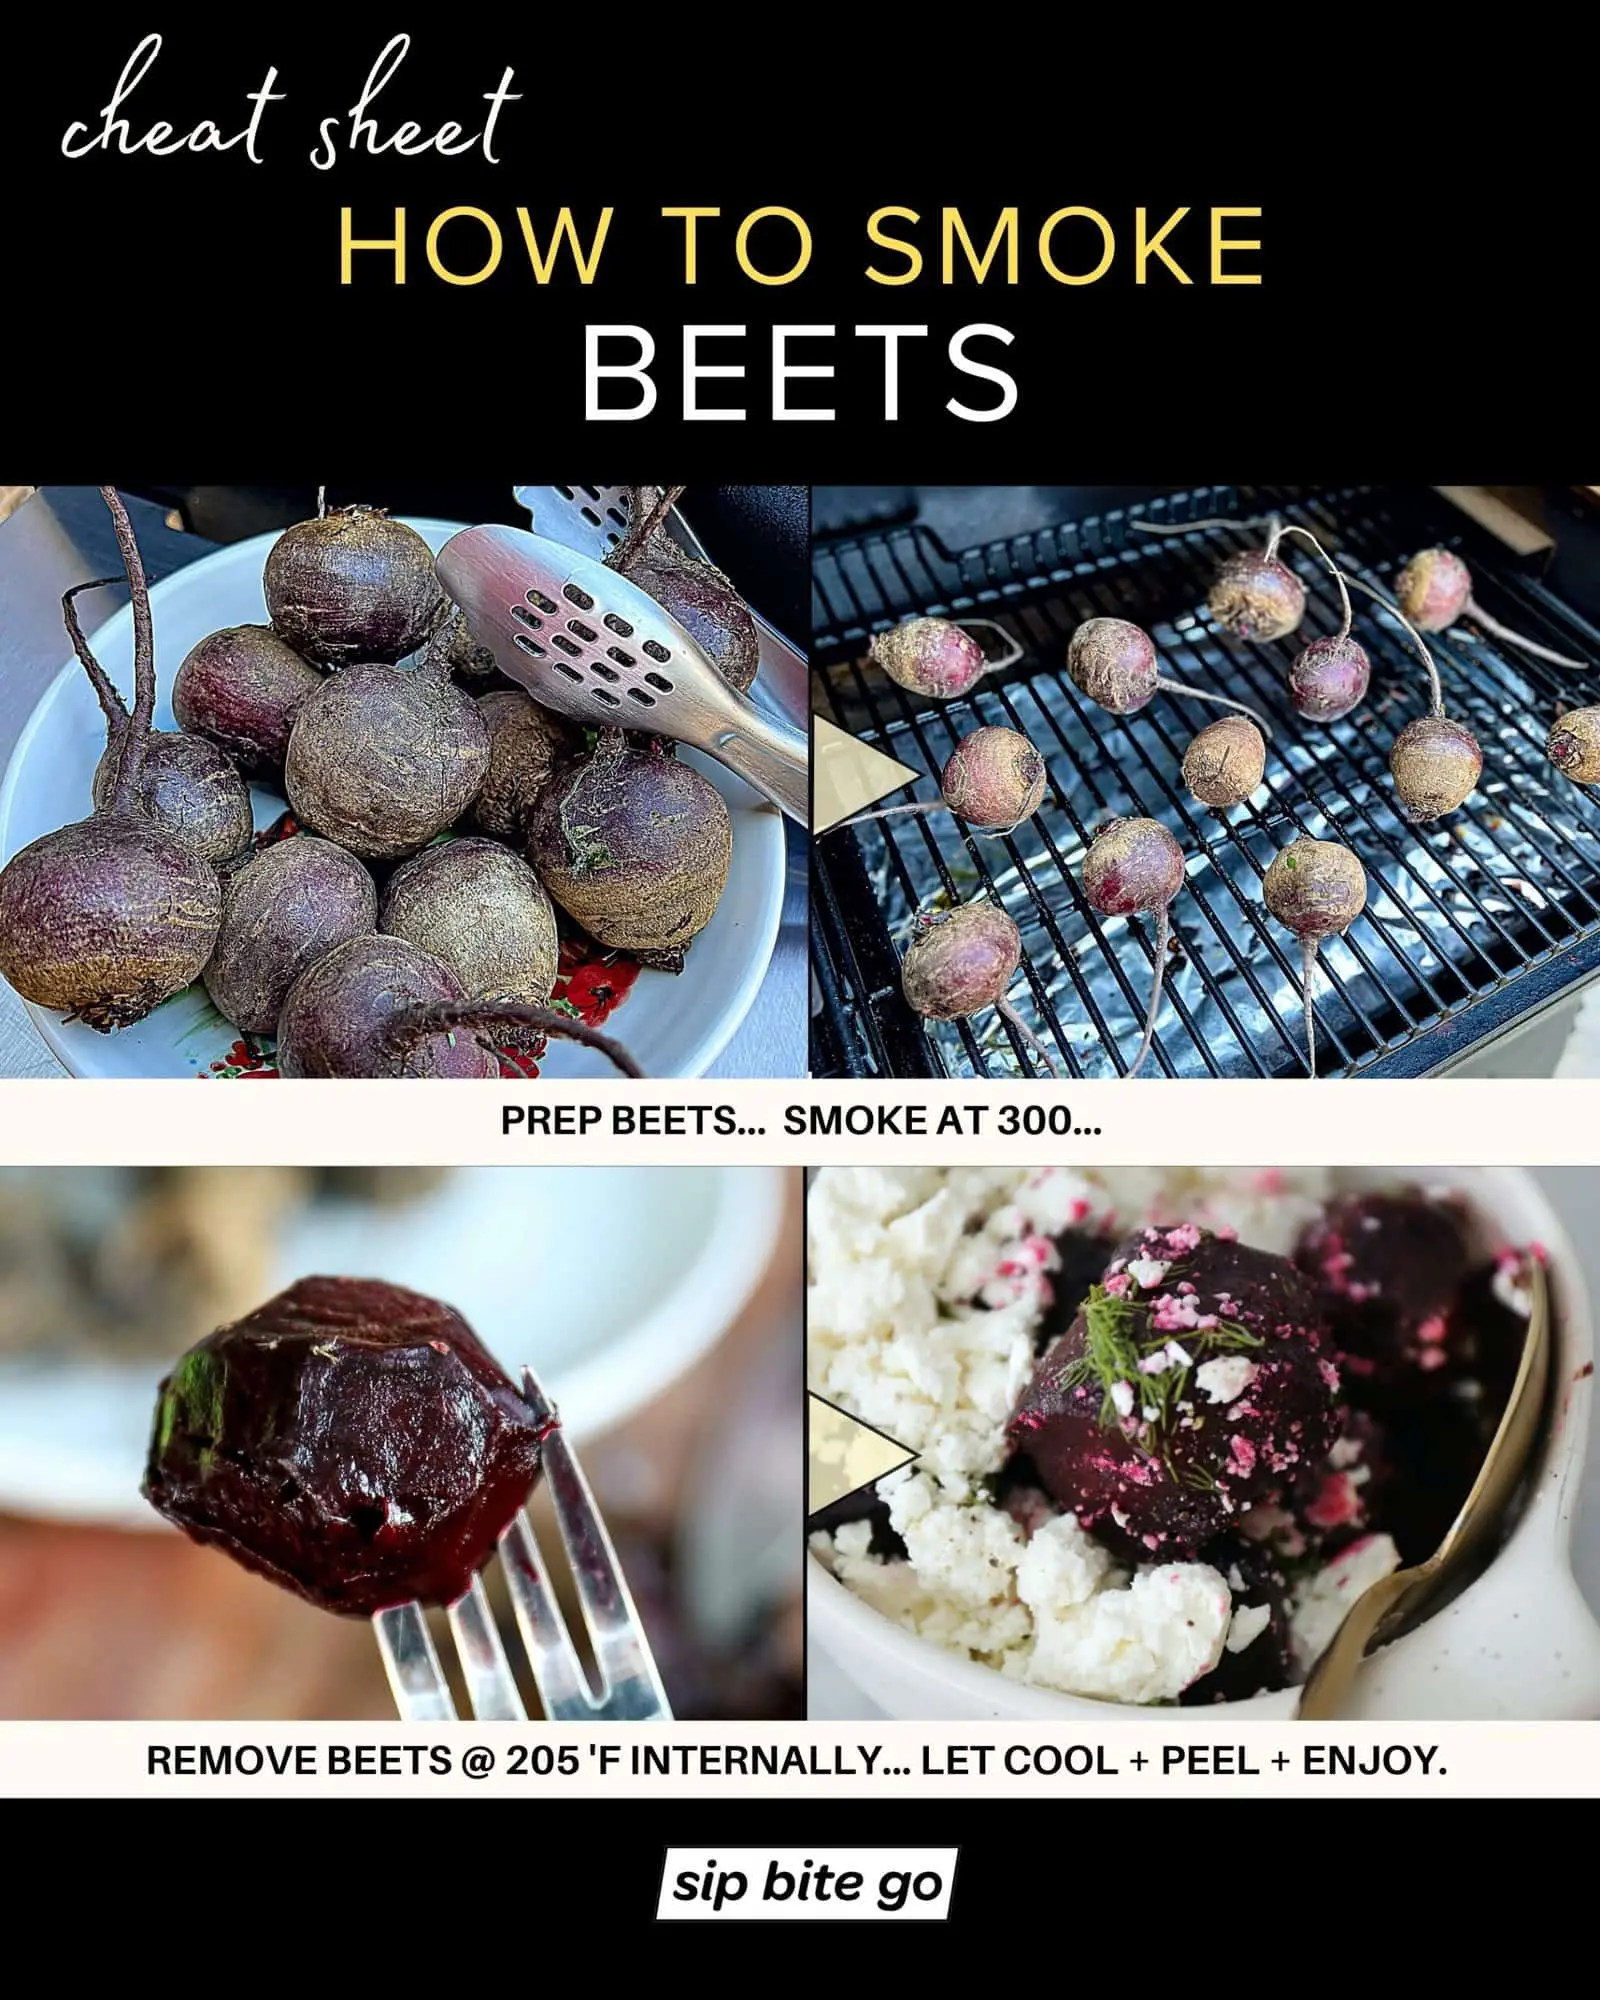 smoked beets traeger - What should I smoke in my Traeger